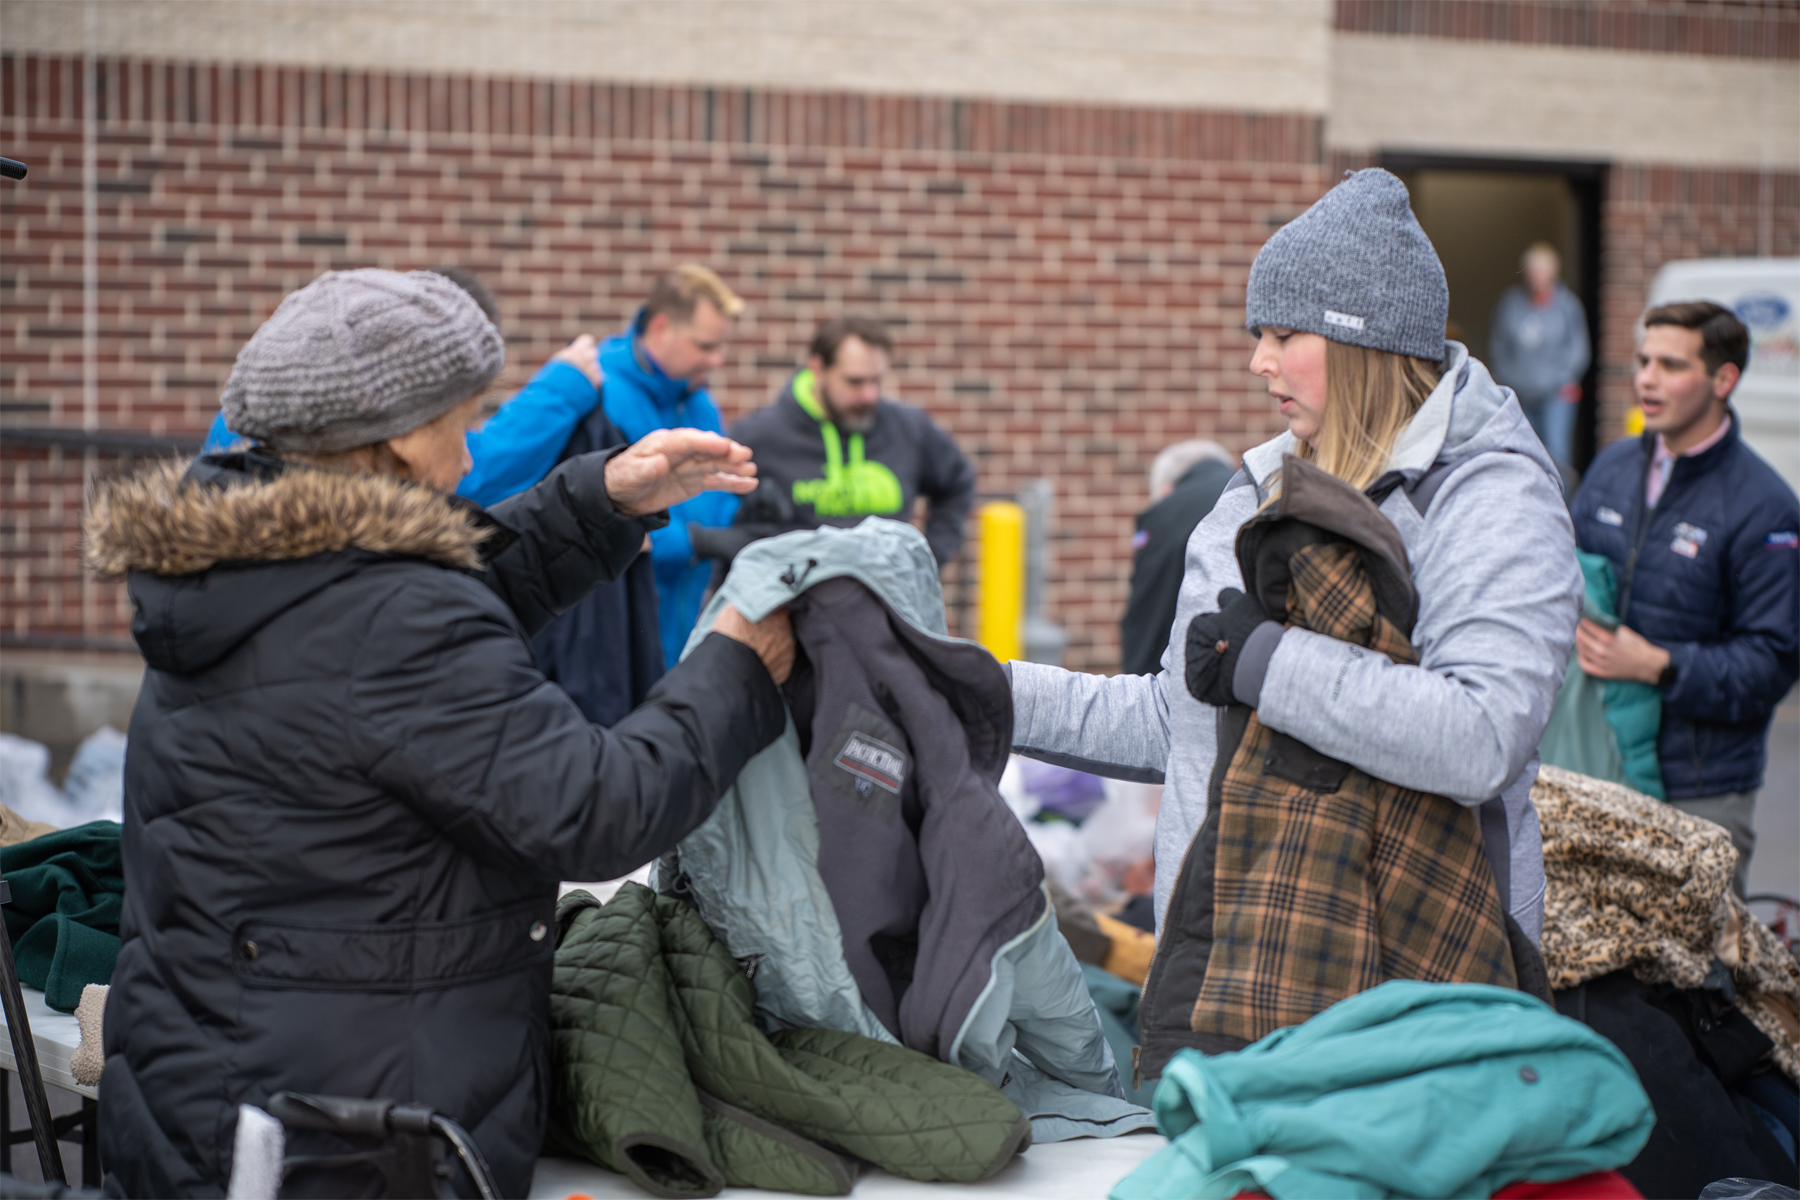 Homeless Shelter in Desperate Need of Winter Clothing Donations